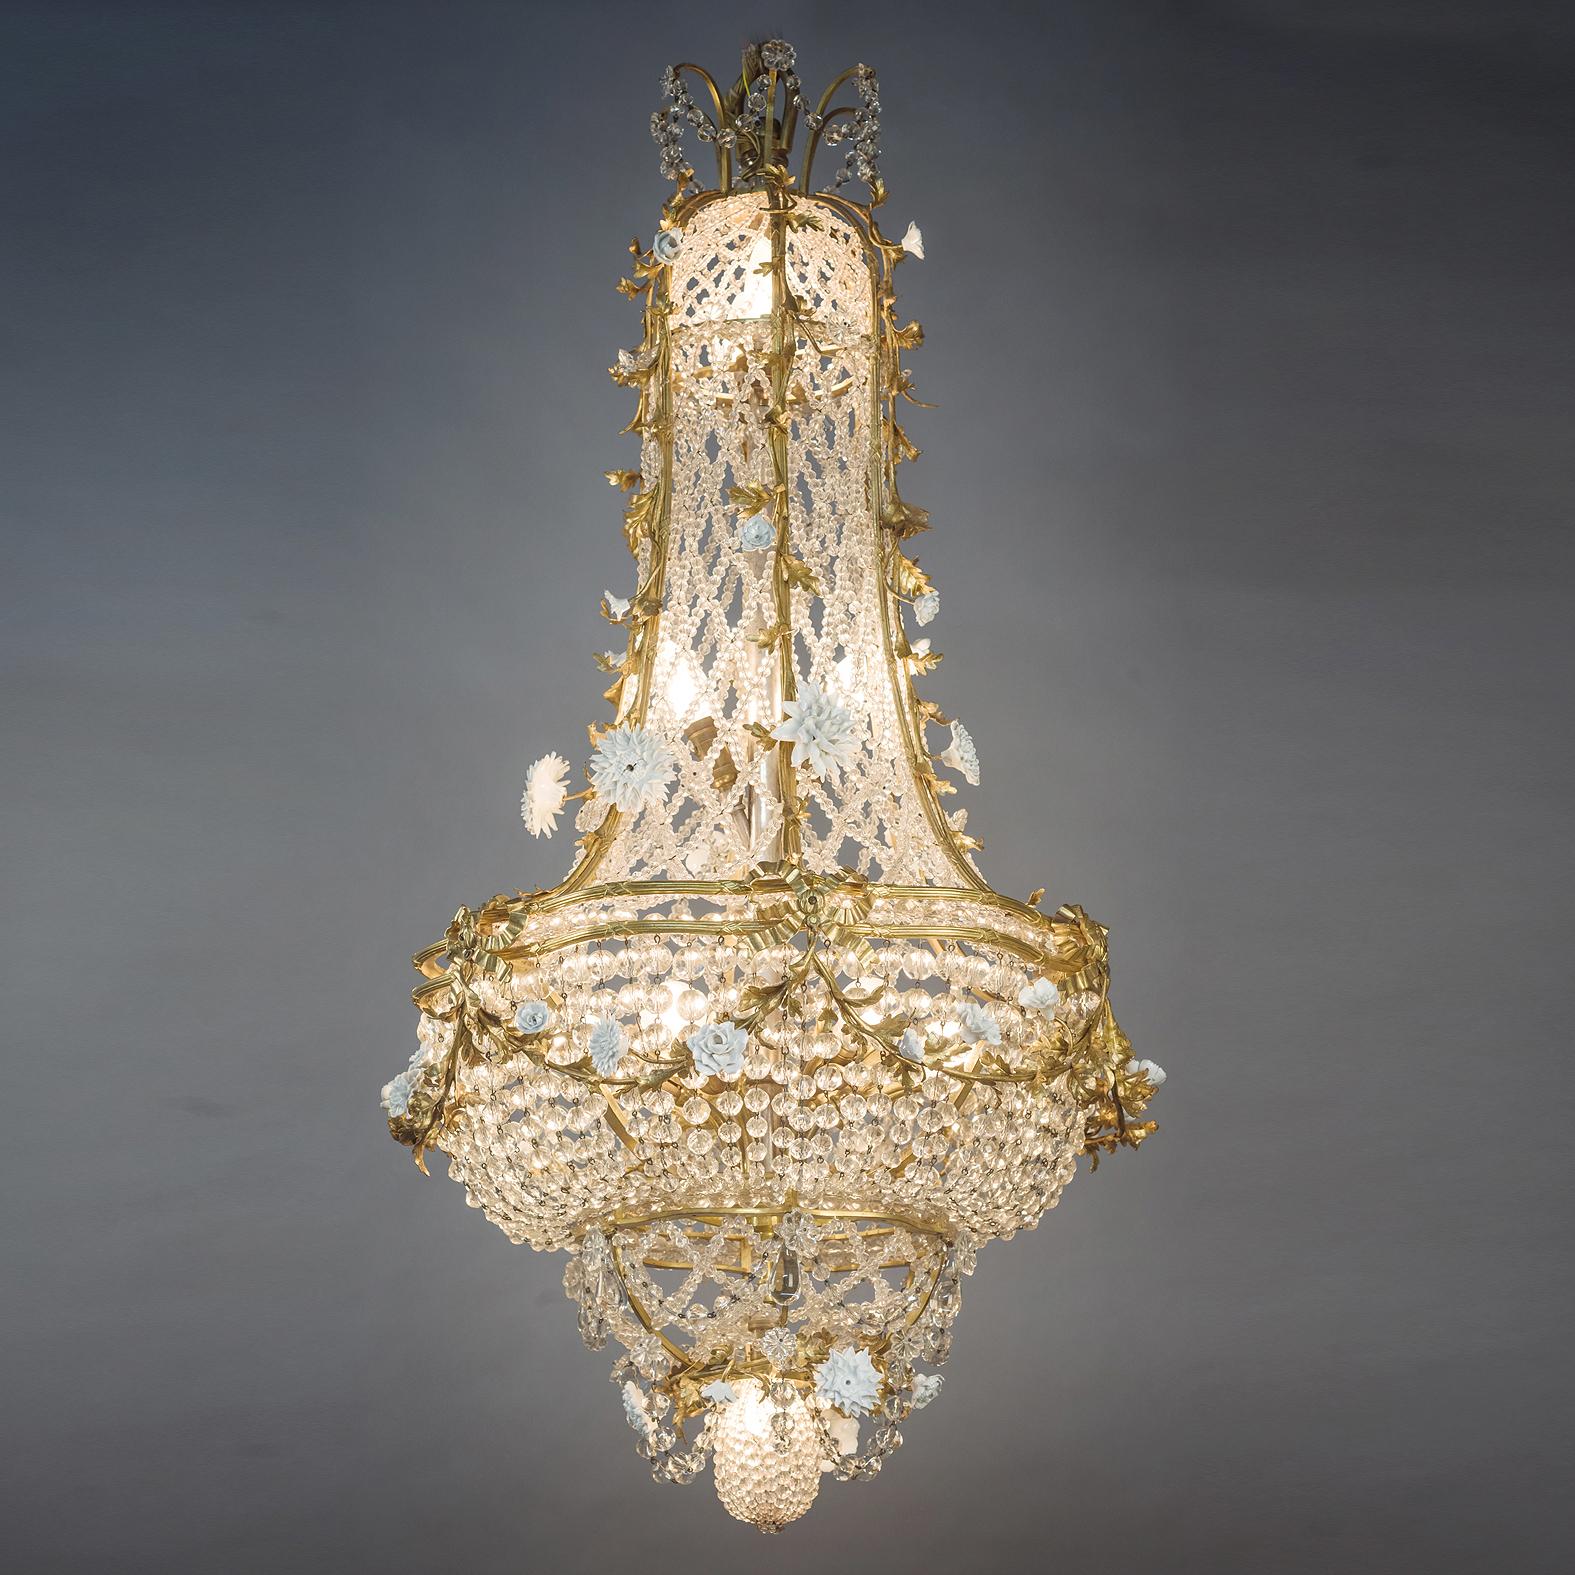 French Louis XVI Style Cage Chandelier Attributed to L'Escalier de Cristal, circa 1900 For Sale